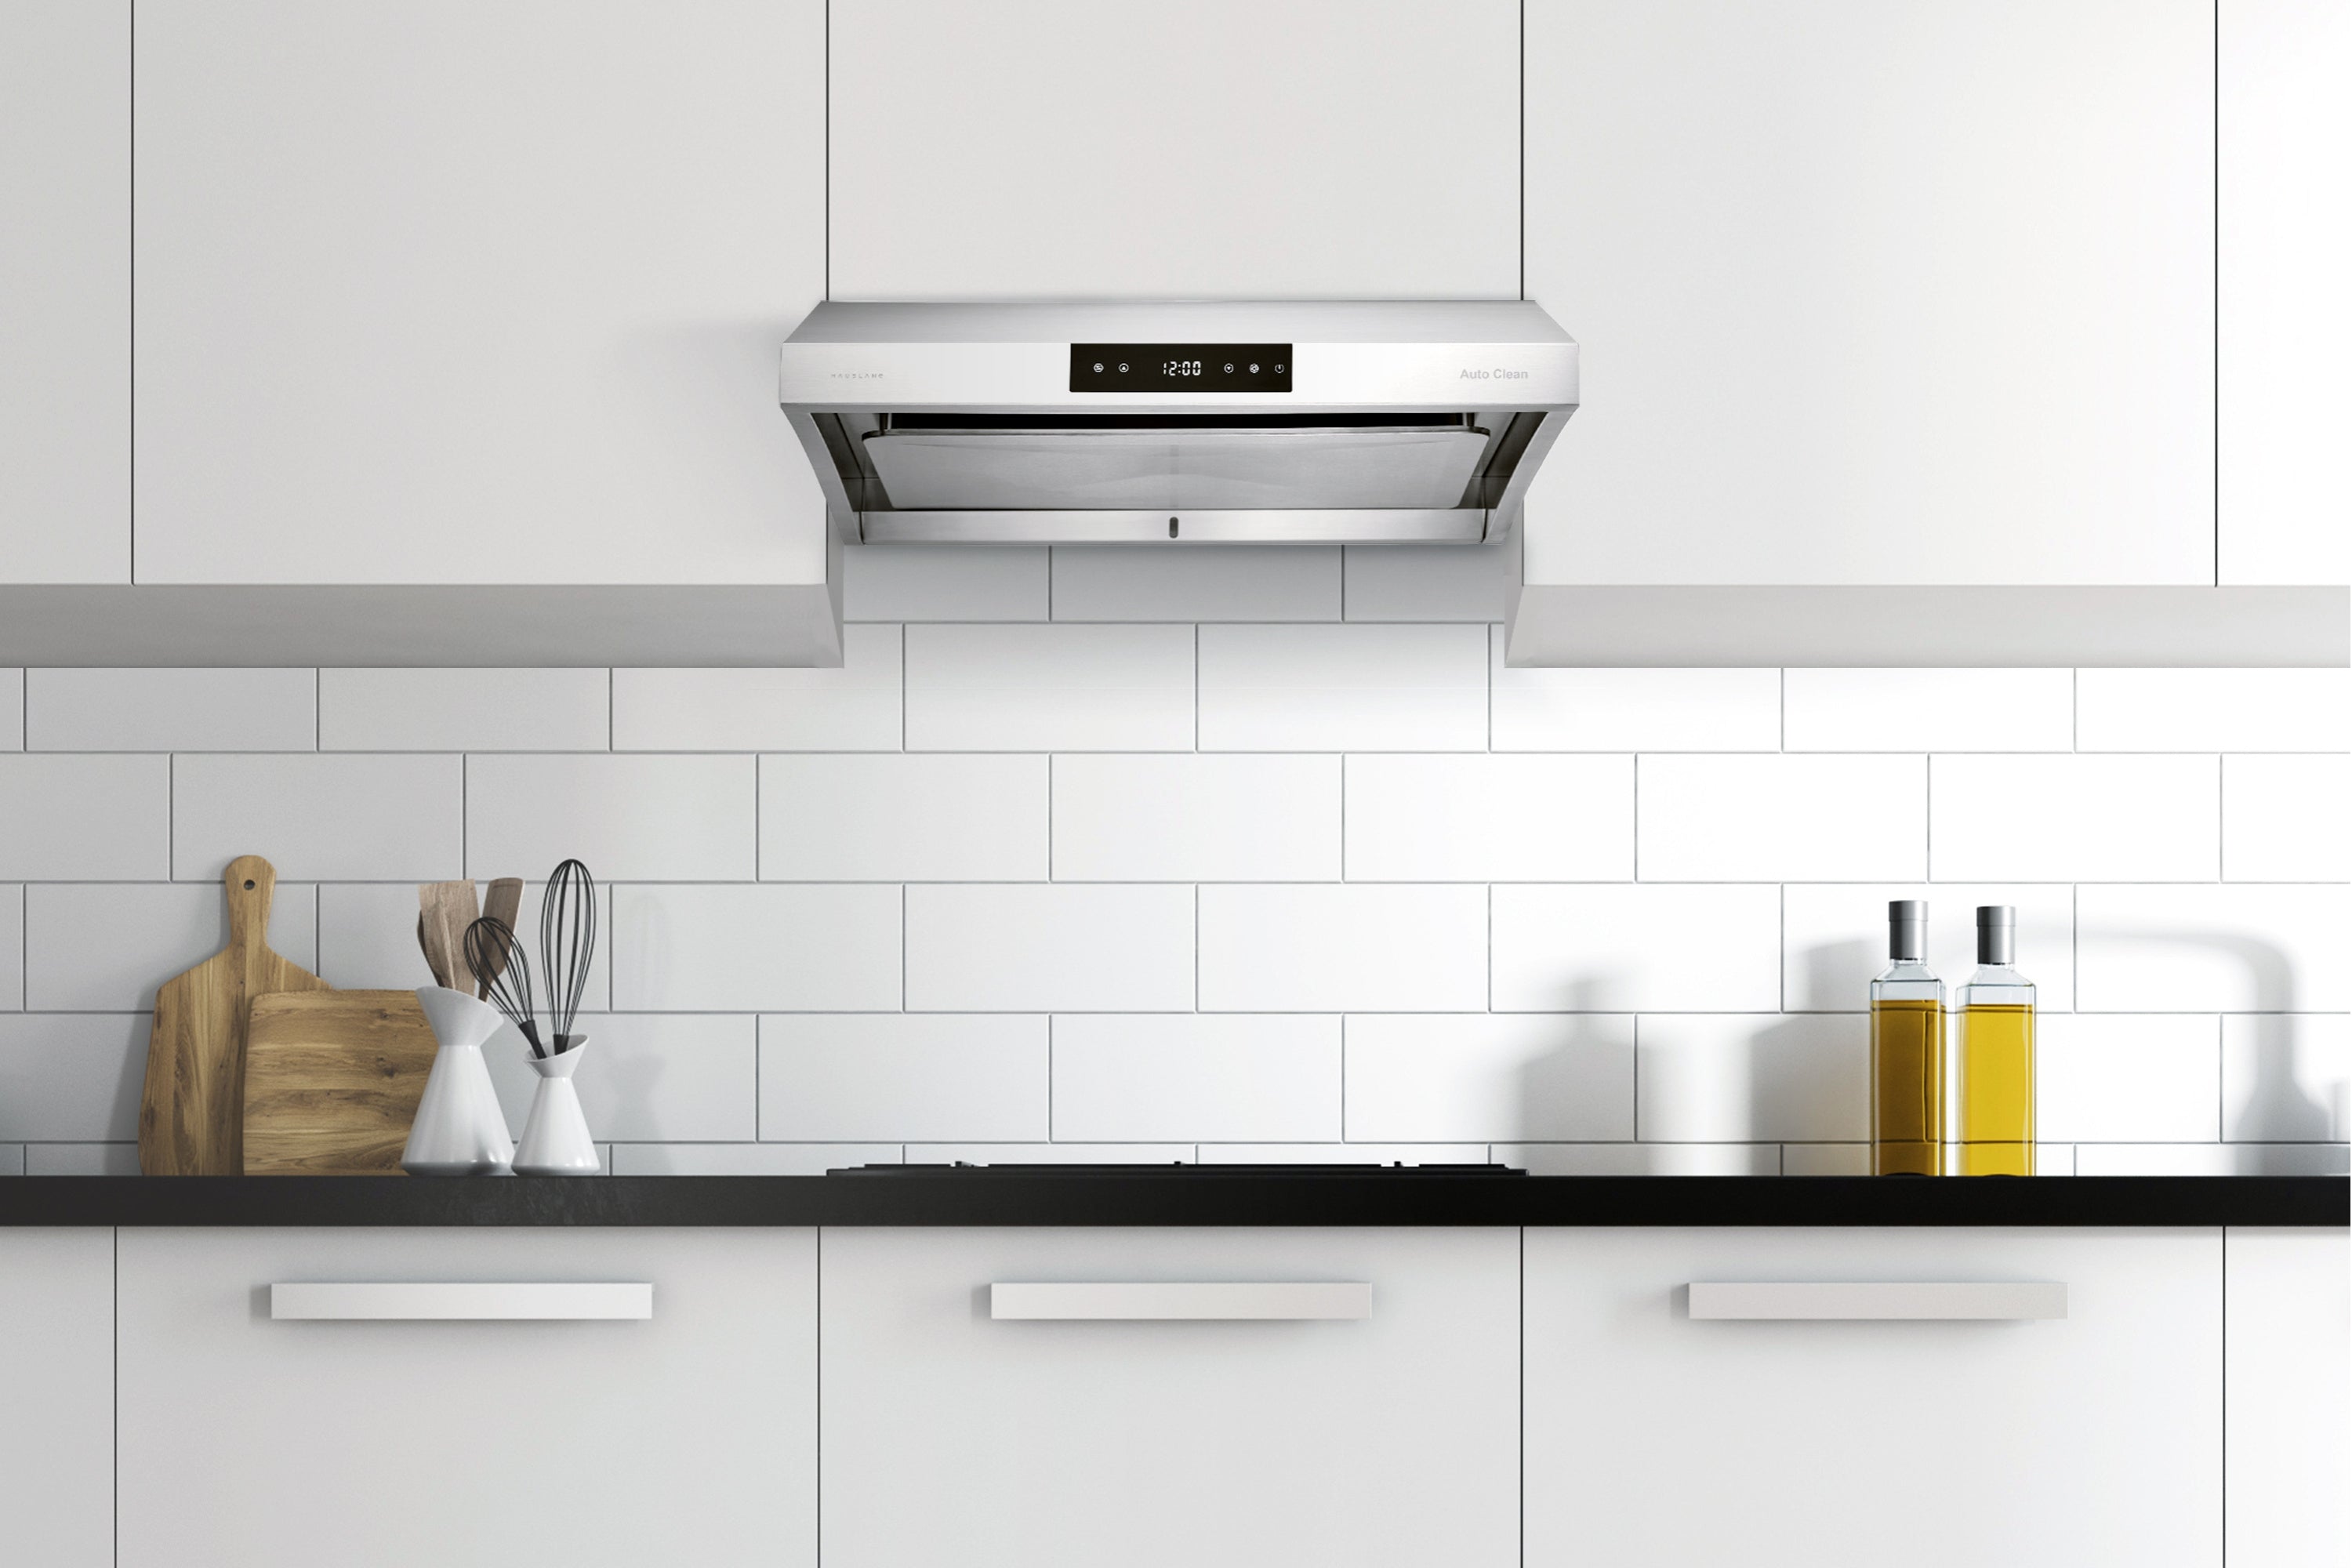 How to Install a Range Hood: A Step-by-Step Guide